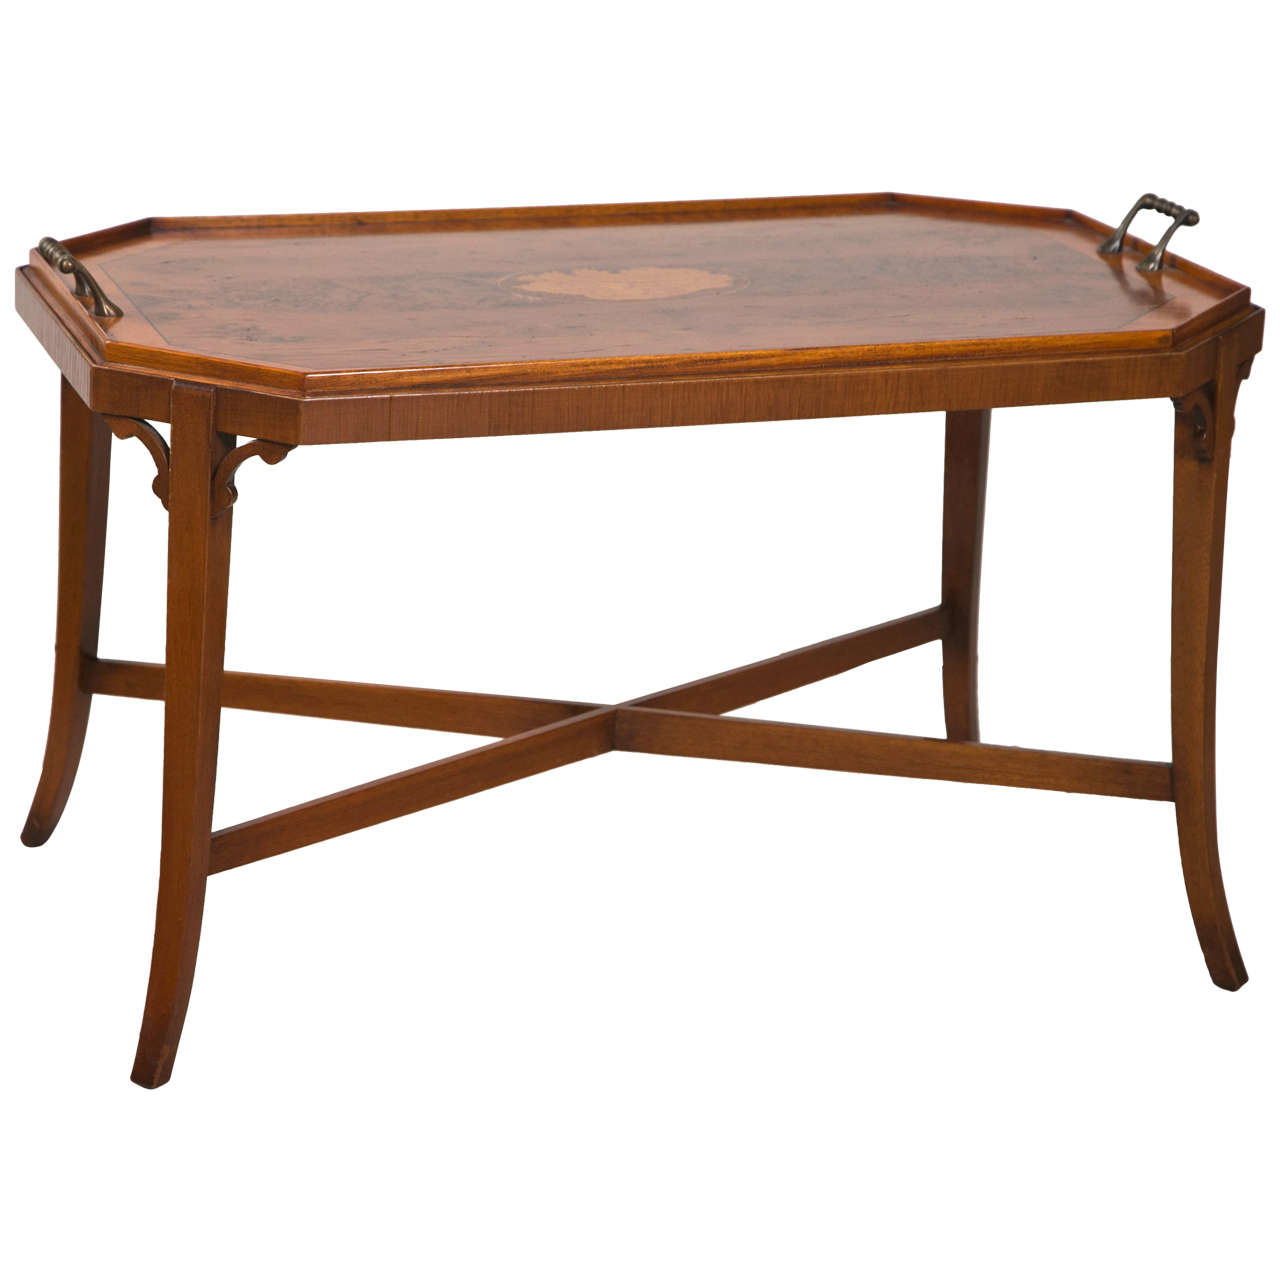 Inlaid Multiwood tray table banded top lift off tray